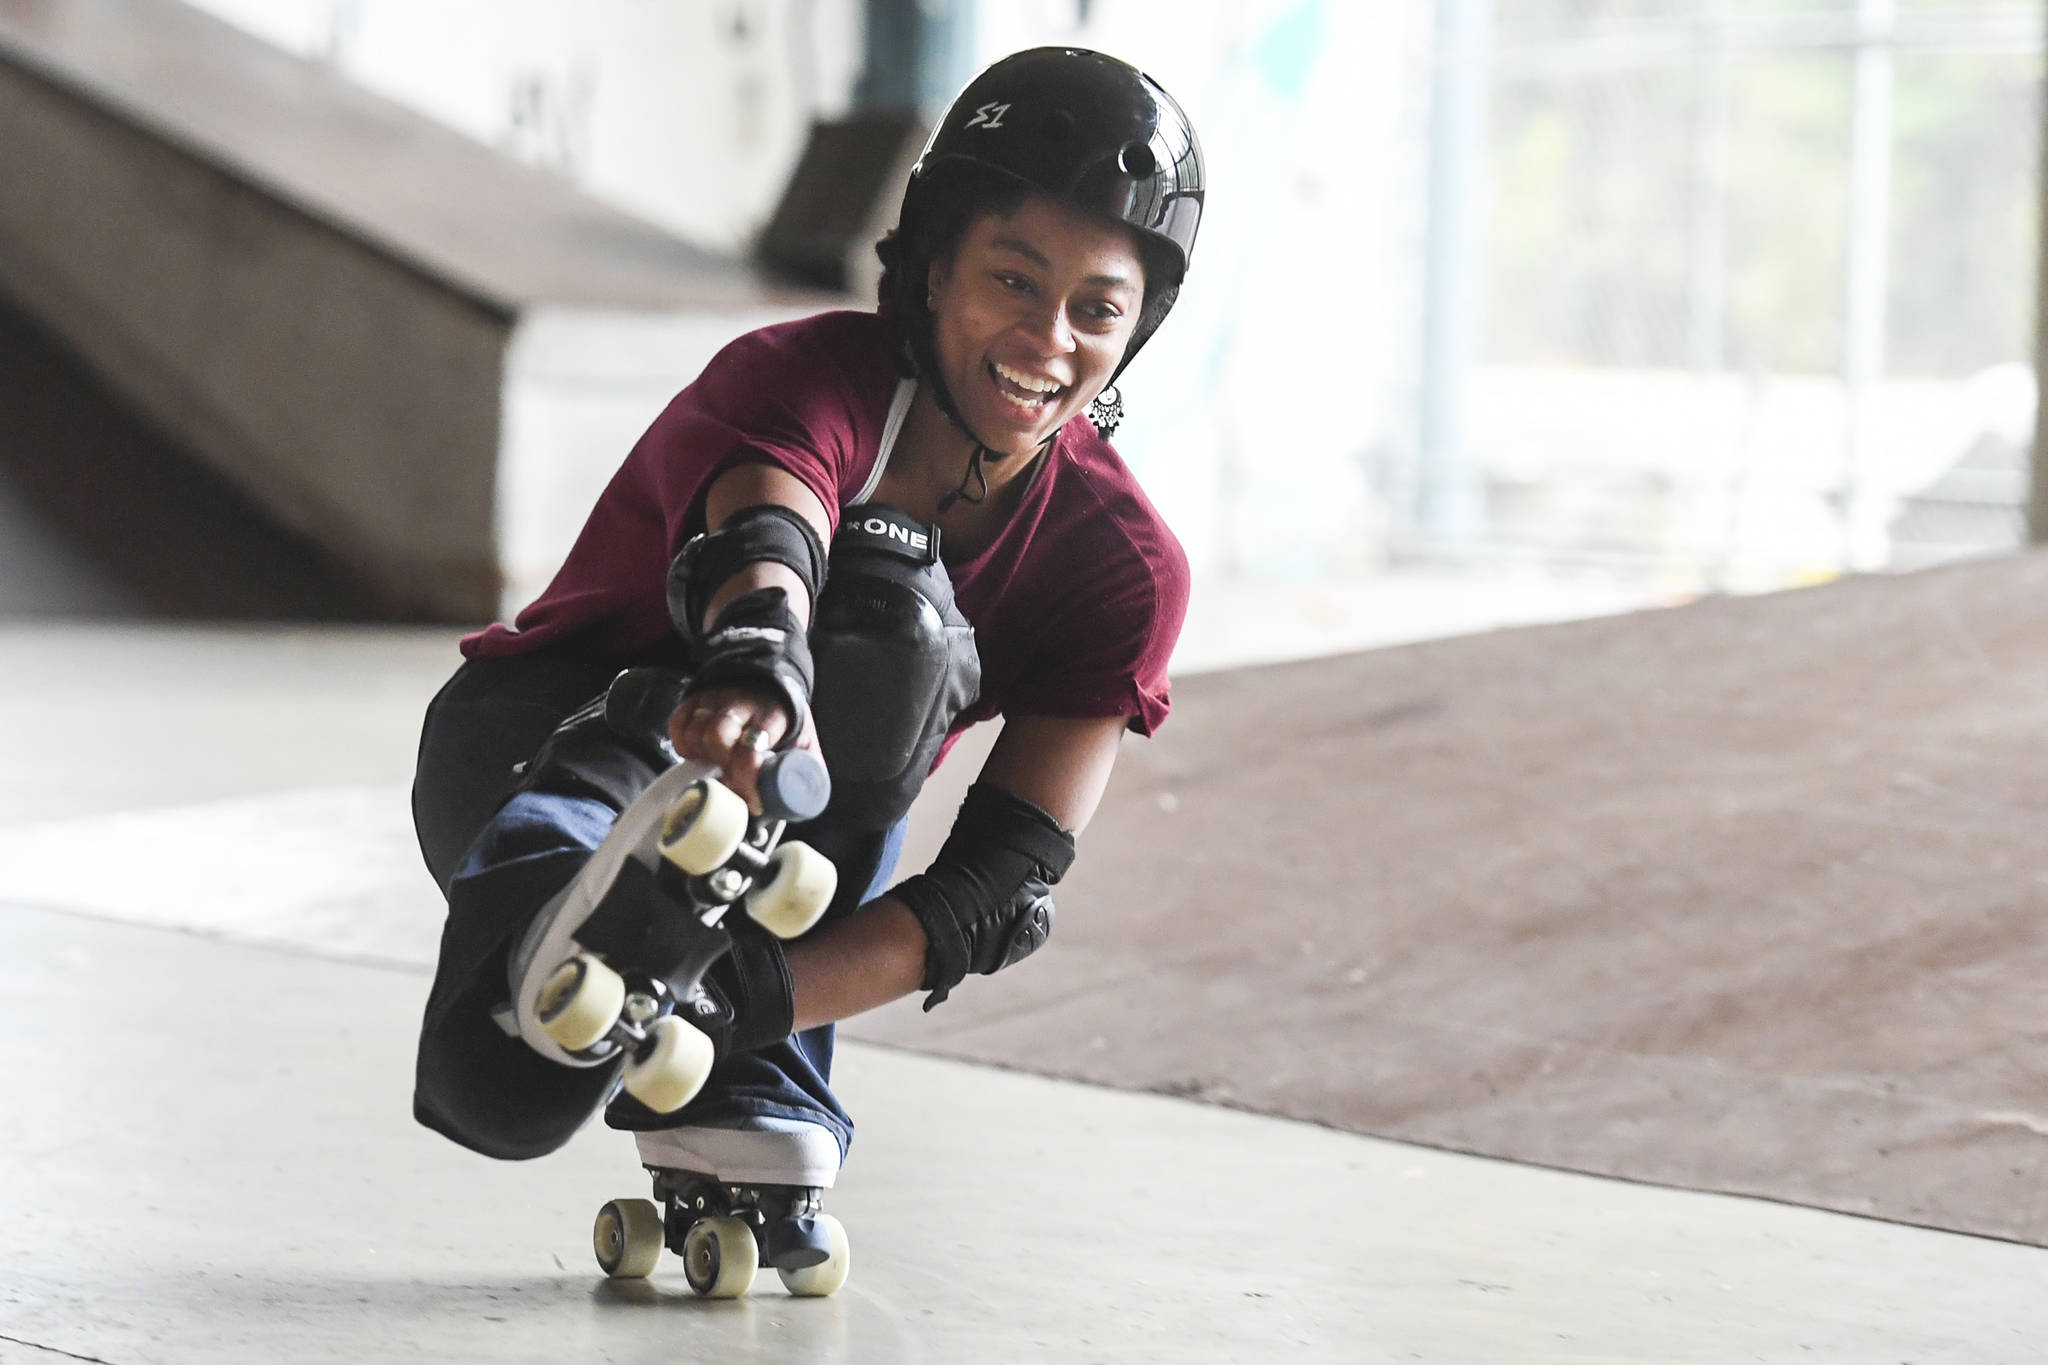 Jennifer Gross, who skates with the Juneau Rollergirls, gets her daily skate in at the Pipeline Skate Park on Friday, Oct. 11, 2019. (Michael Penn | Juneau Empire)